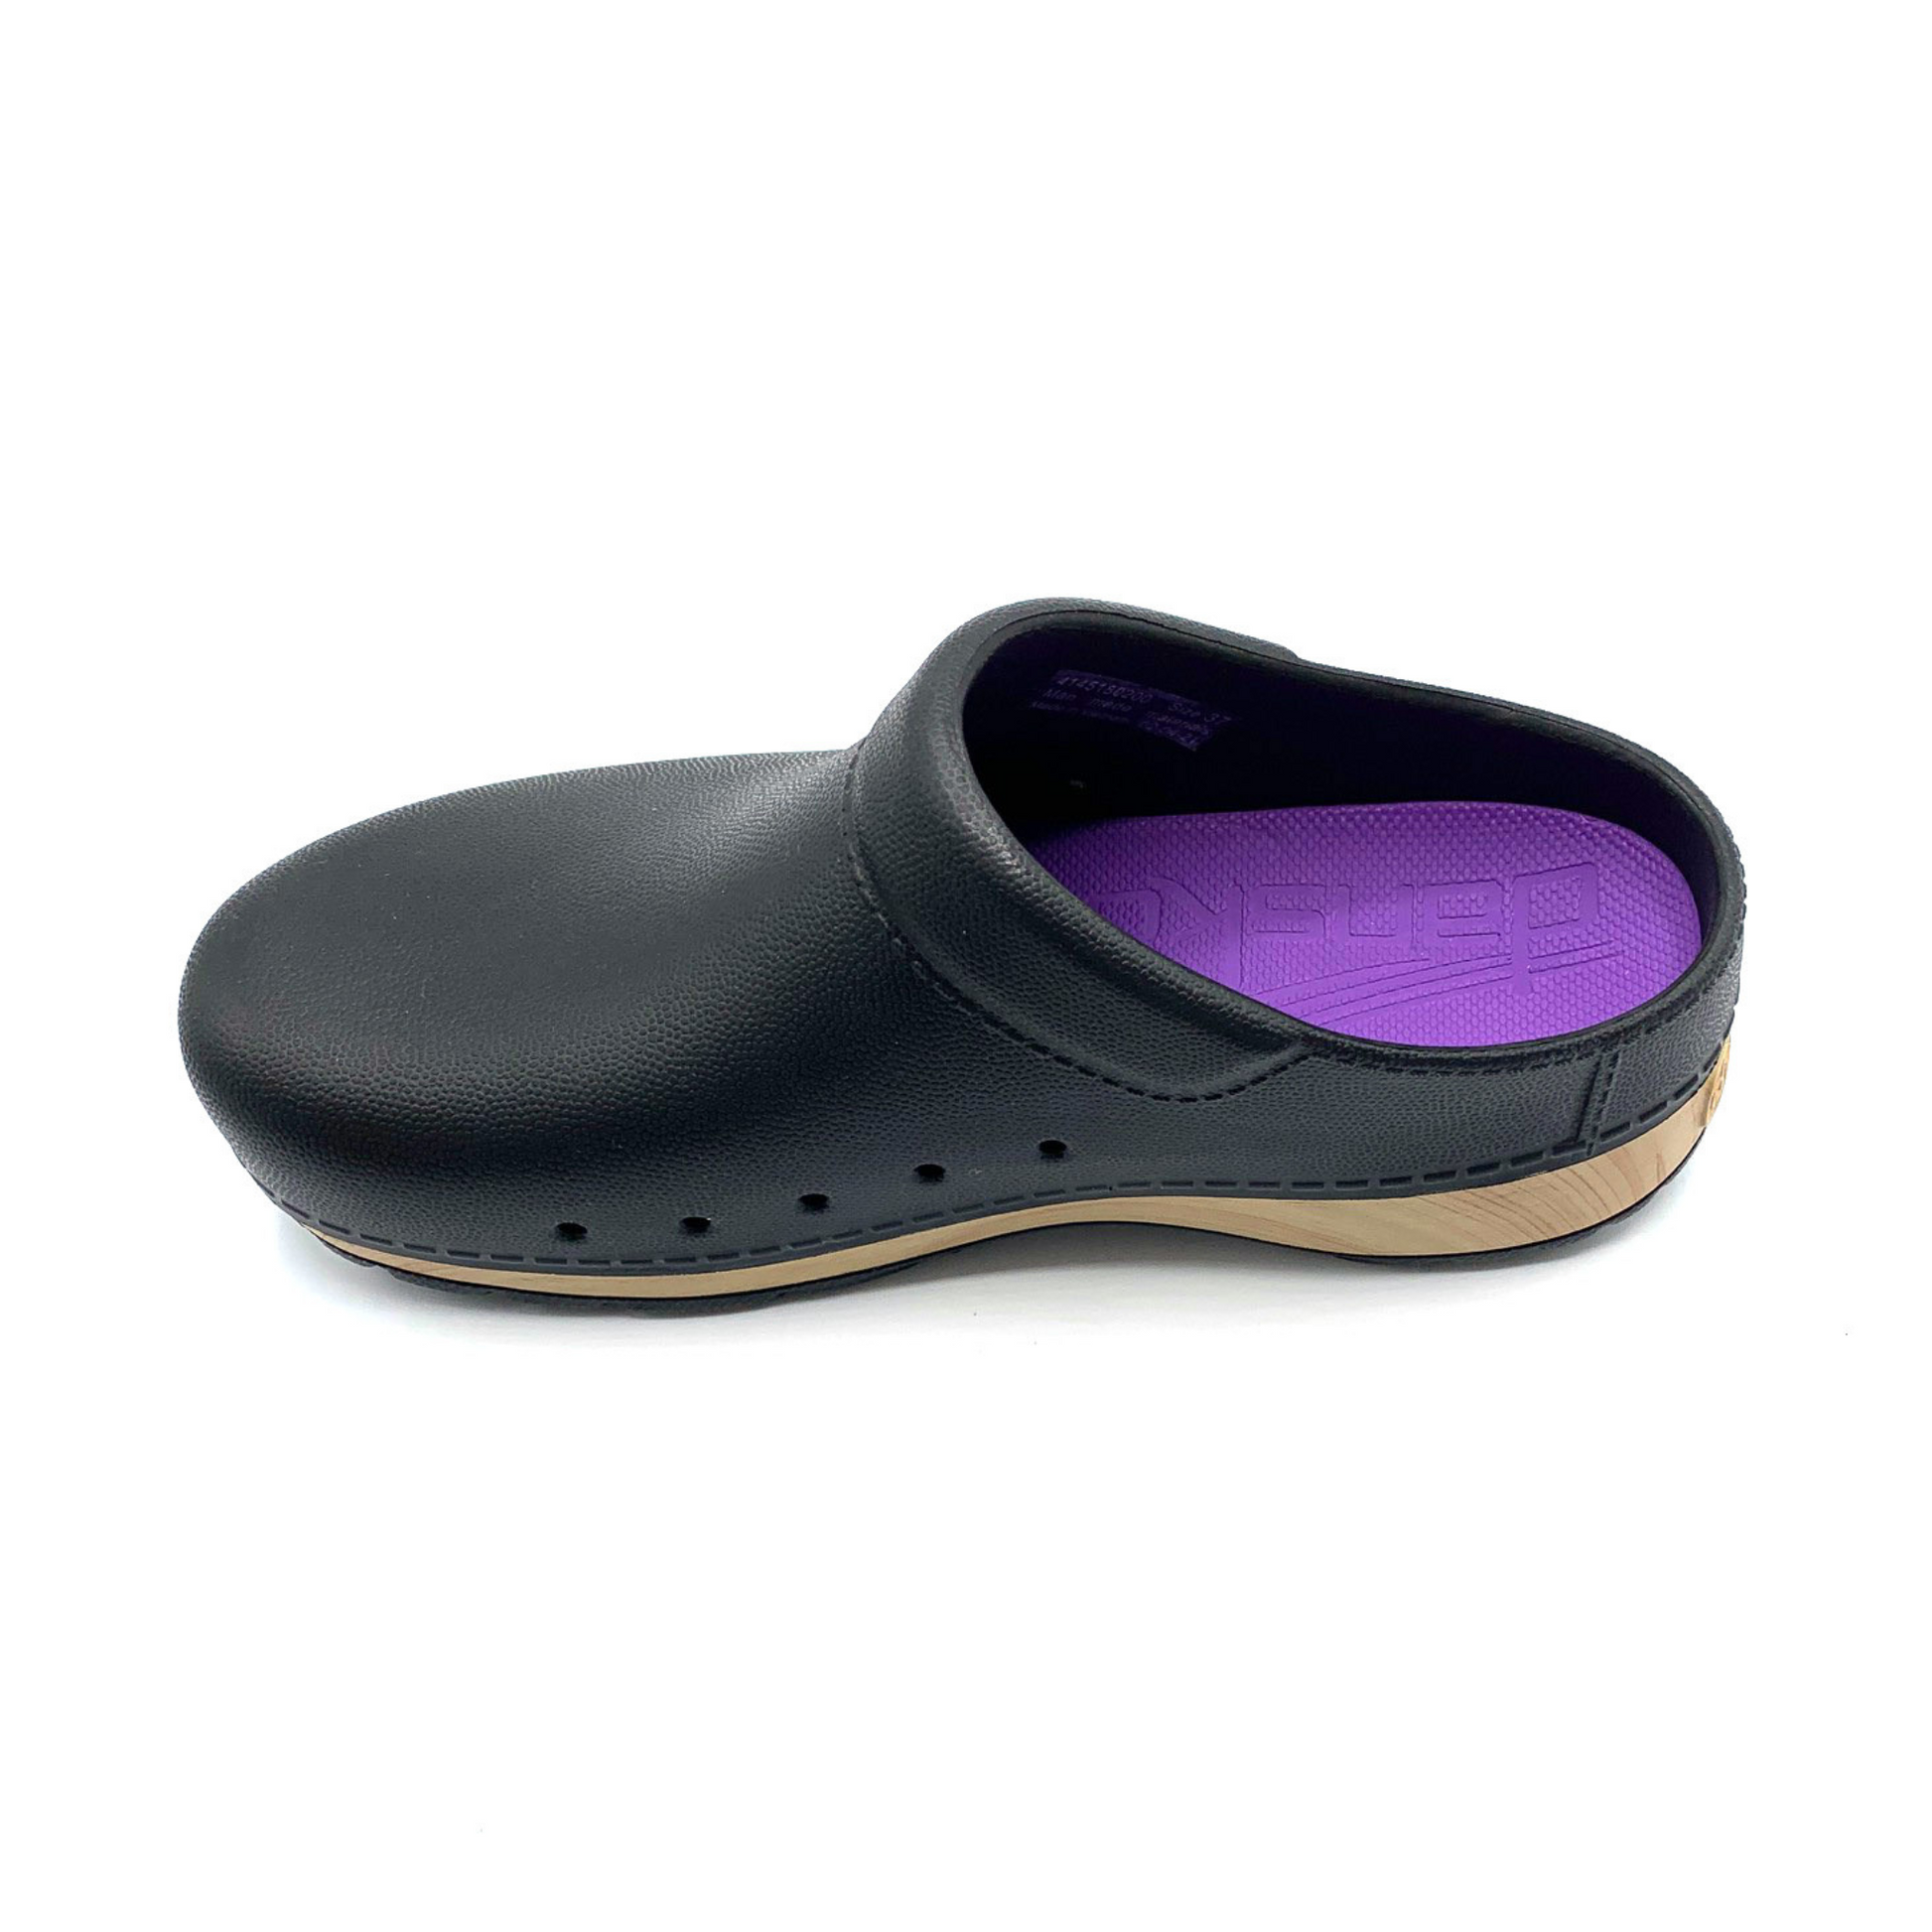 A top left view of a black clog with five small holes in the side, a wood patterned base, and a purple insole.